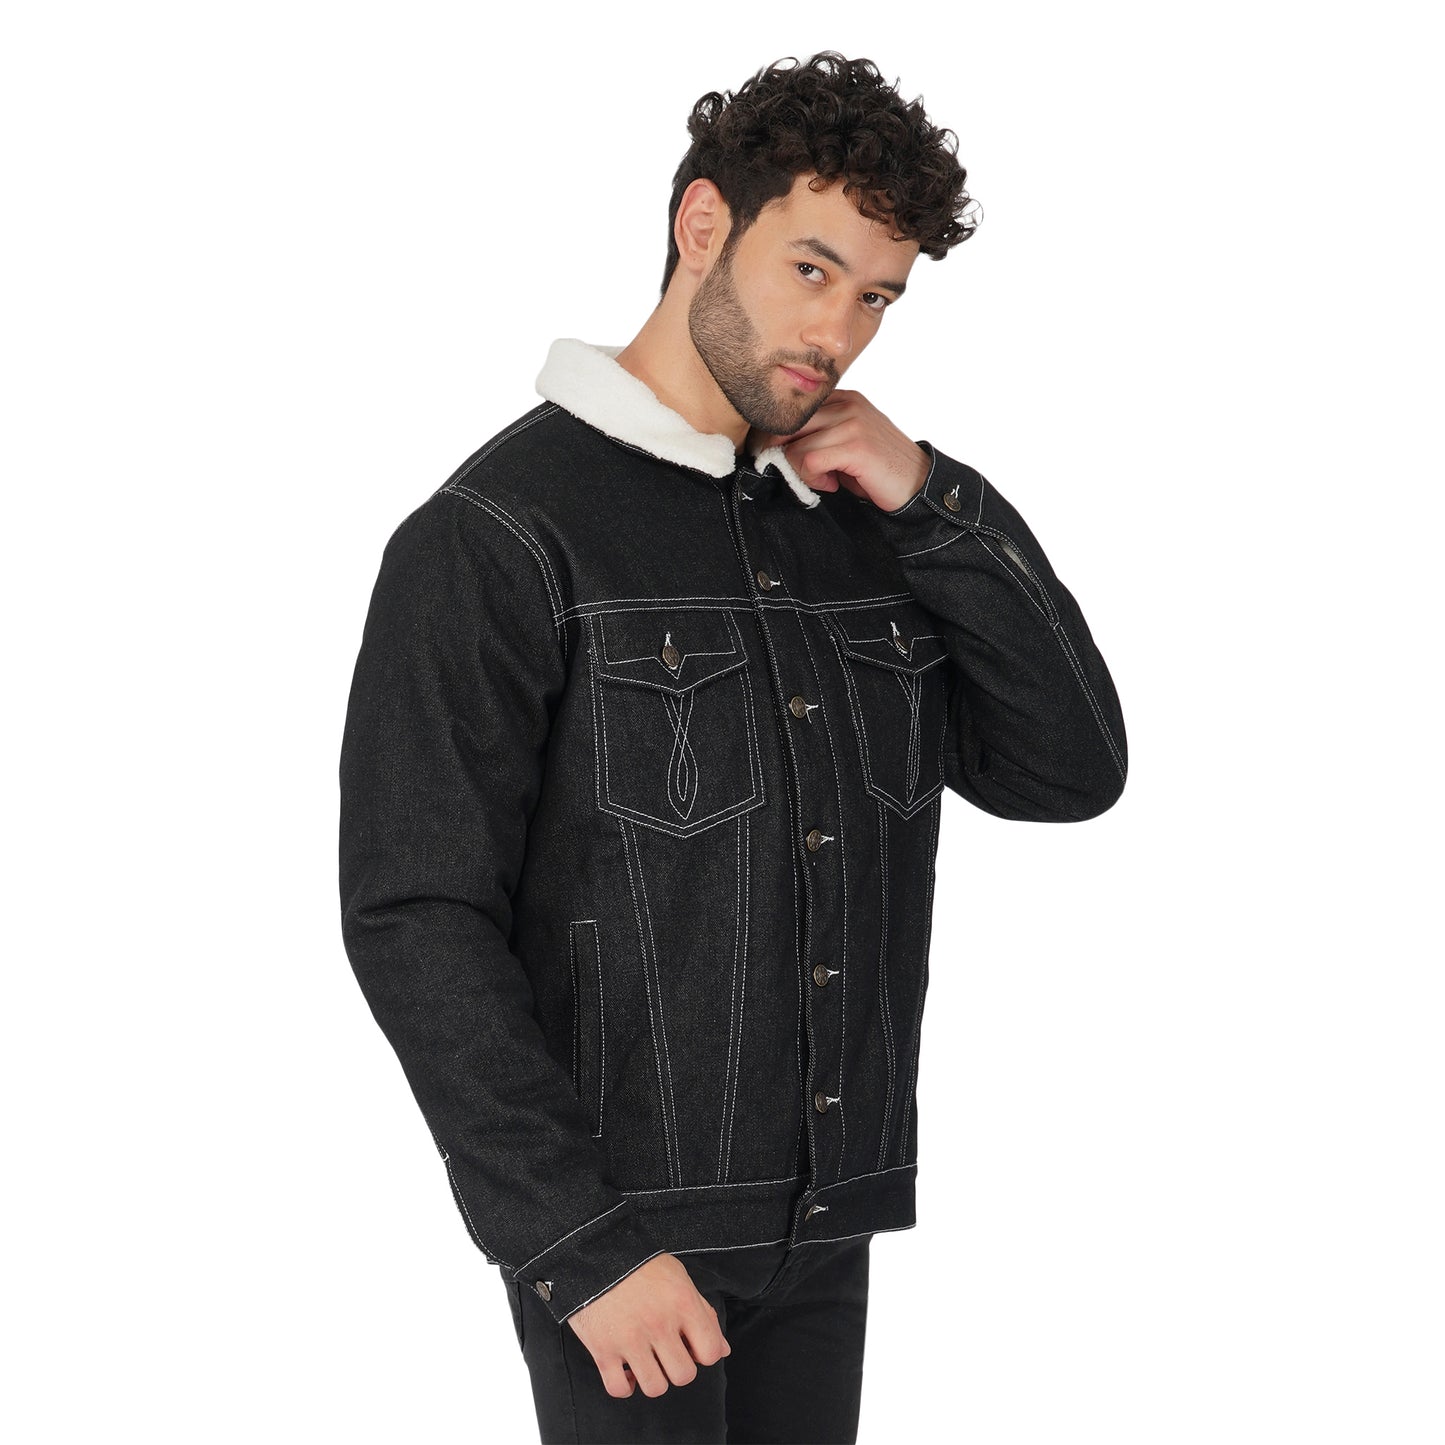 SLAY. Men's Full Sleeves Black Solid Embroidered Button-Down Black Denim Jacket with Faux-fur Lining-clothing-to-slay.myshopify.com-Jacket